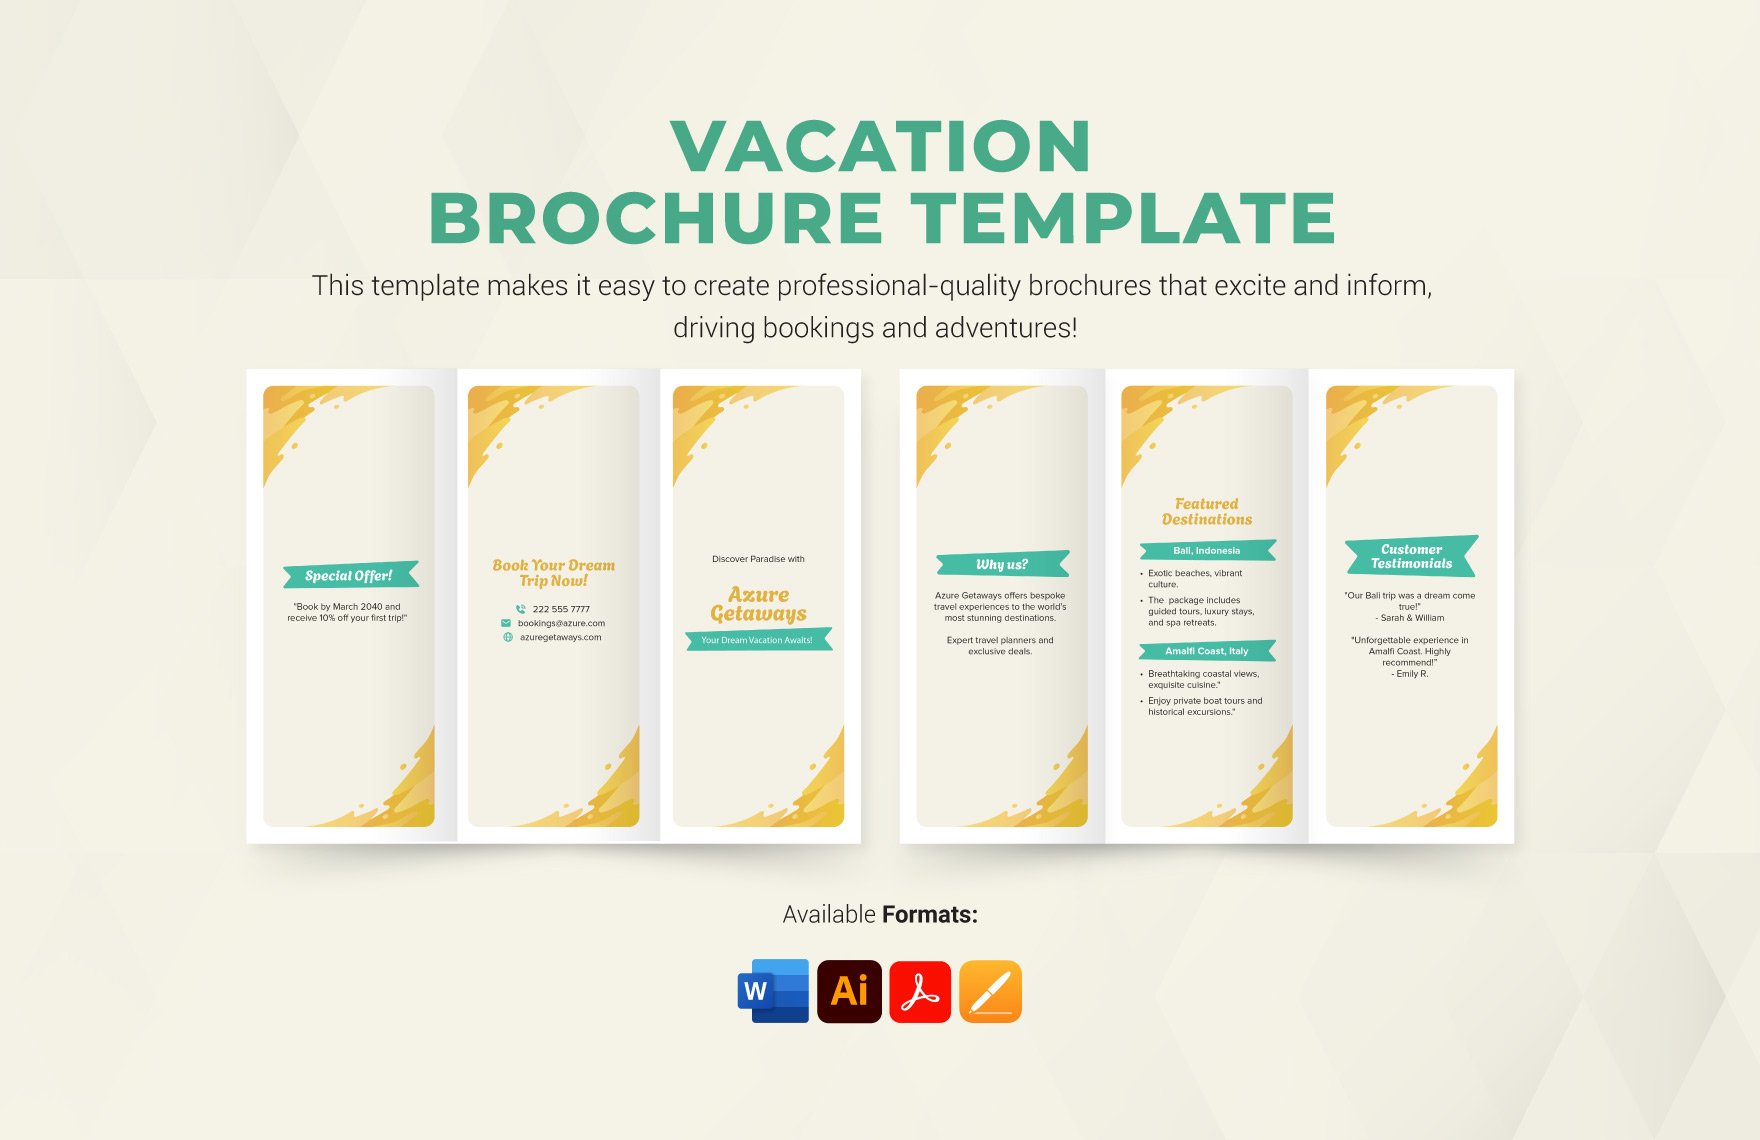 Vacation Brochure Template in Word, PDF, Illustrator, Apple Pages